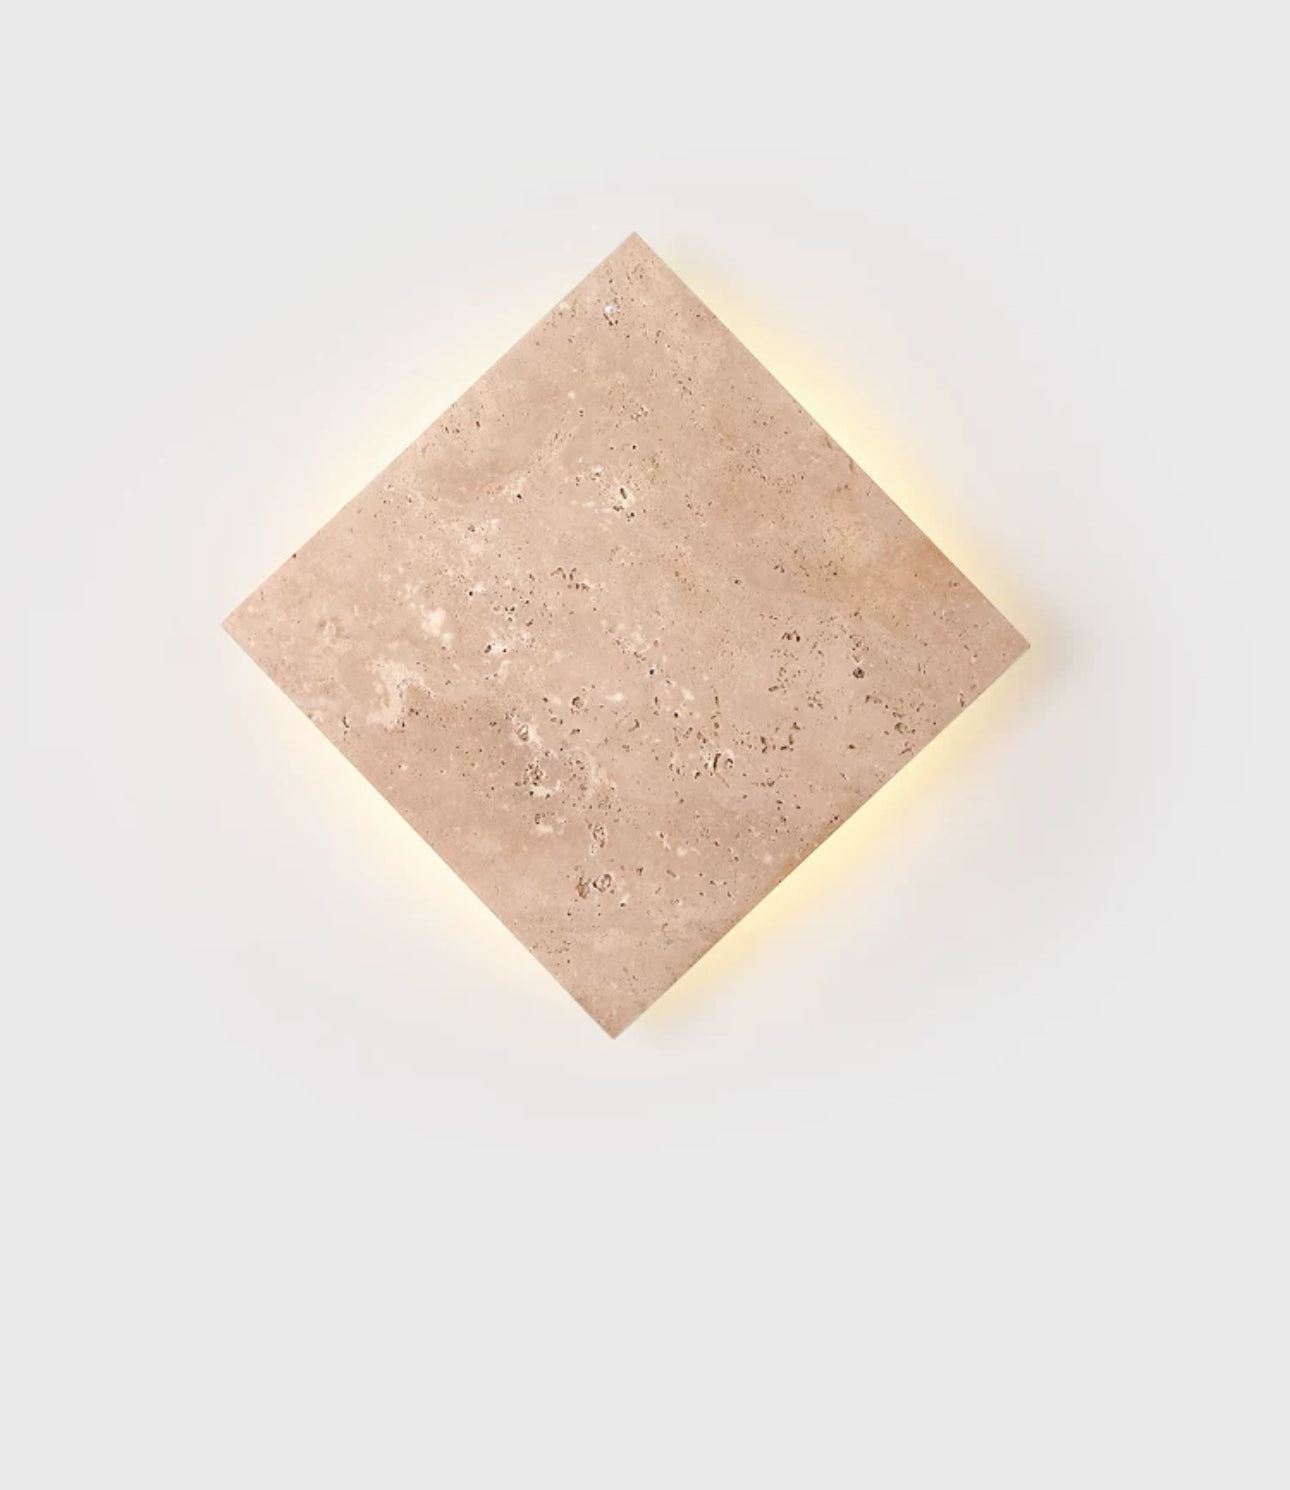 Minimalist Marble And Stone 25x25cm Warm Led Lighting Intelligent Control - Wall Lamps